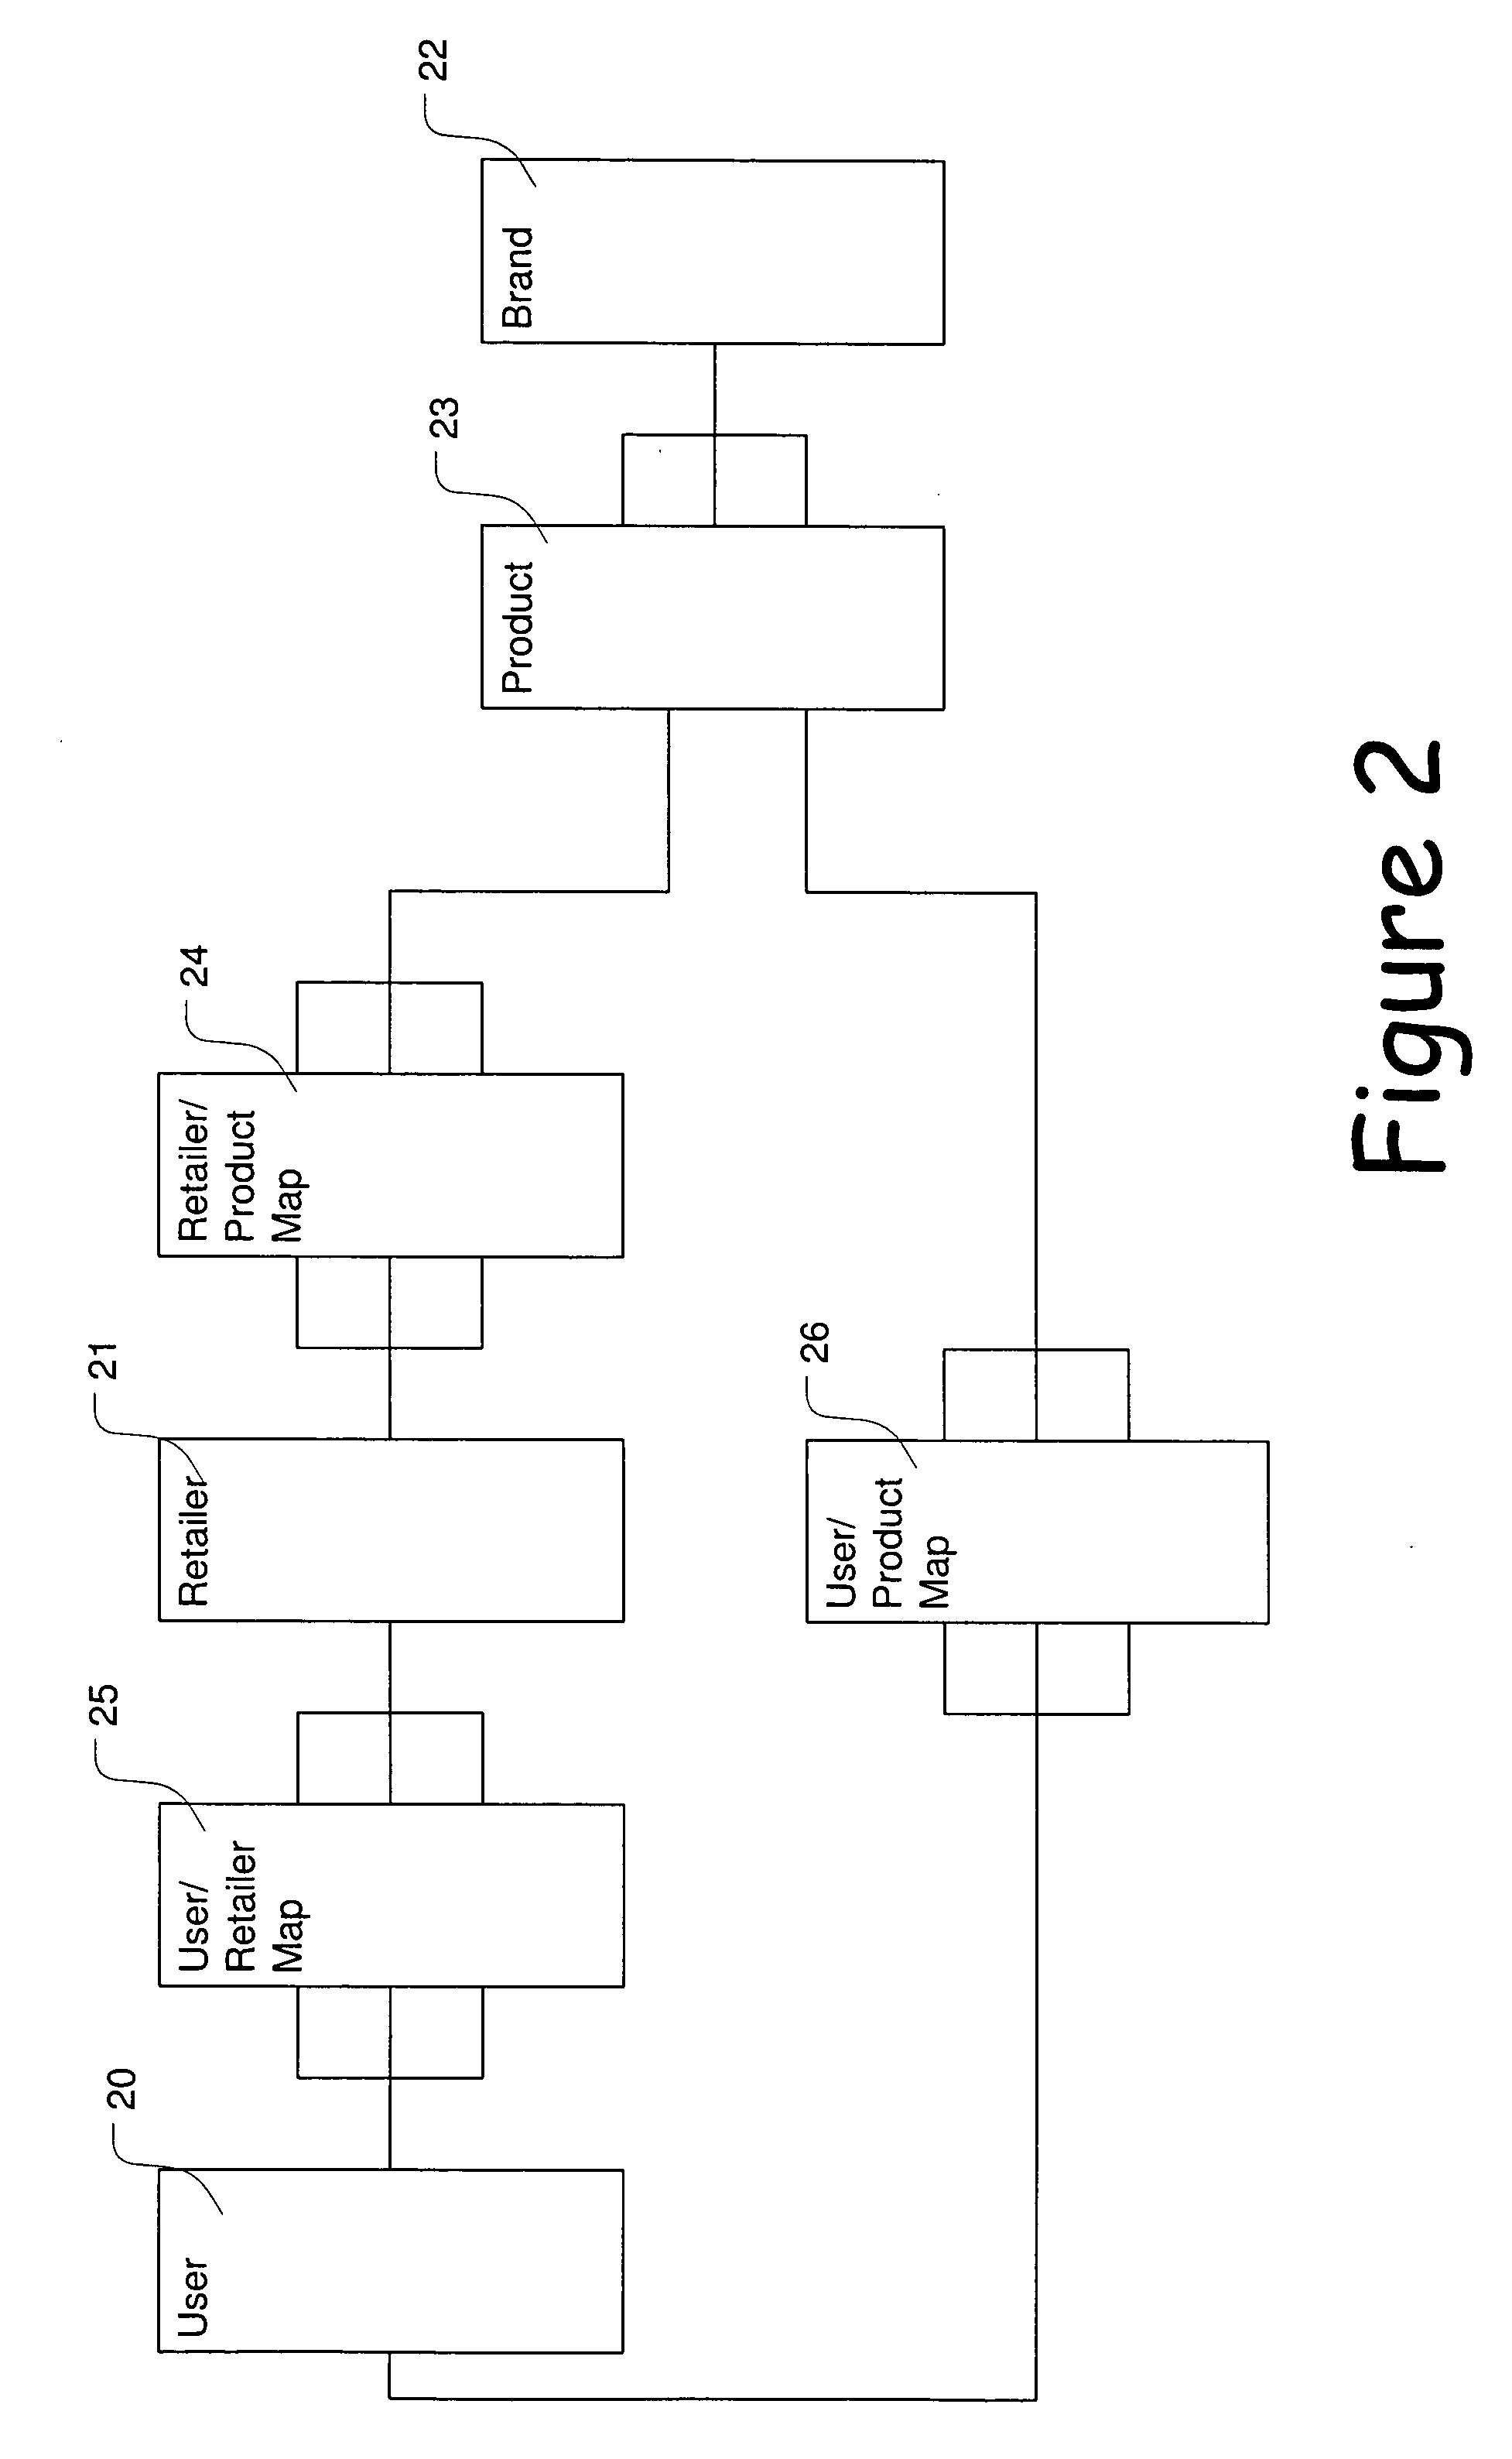 Discount and/or loyalty reward system and retail apparatus therefor